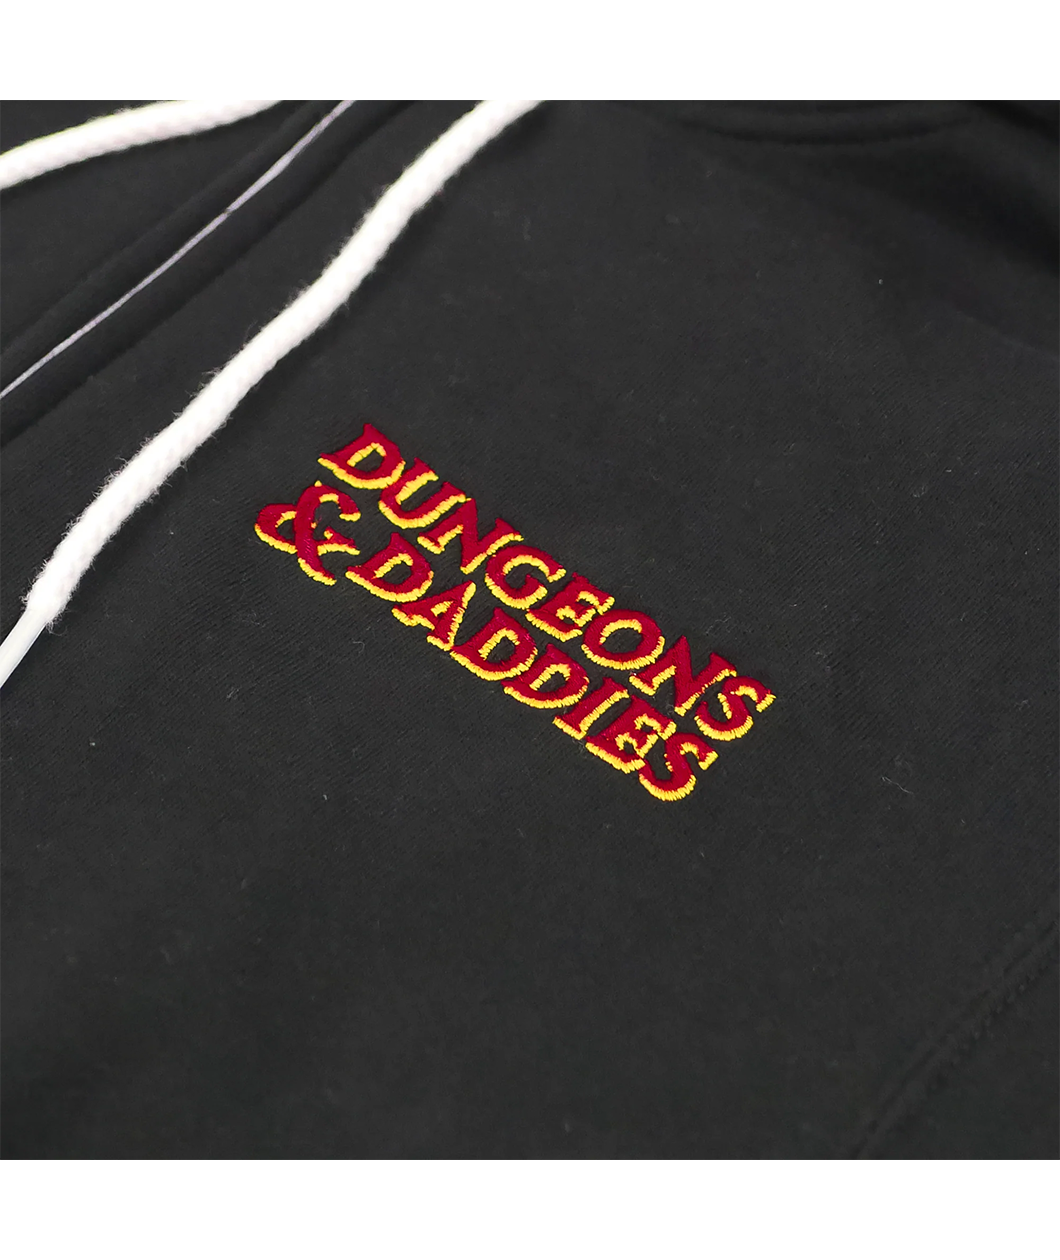 Close up of embroidered Dungeons & Daddies logo in red and yellow.